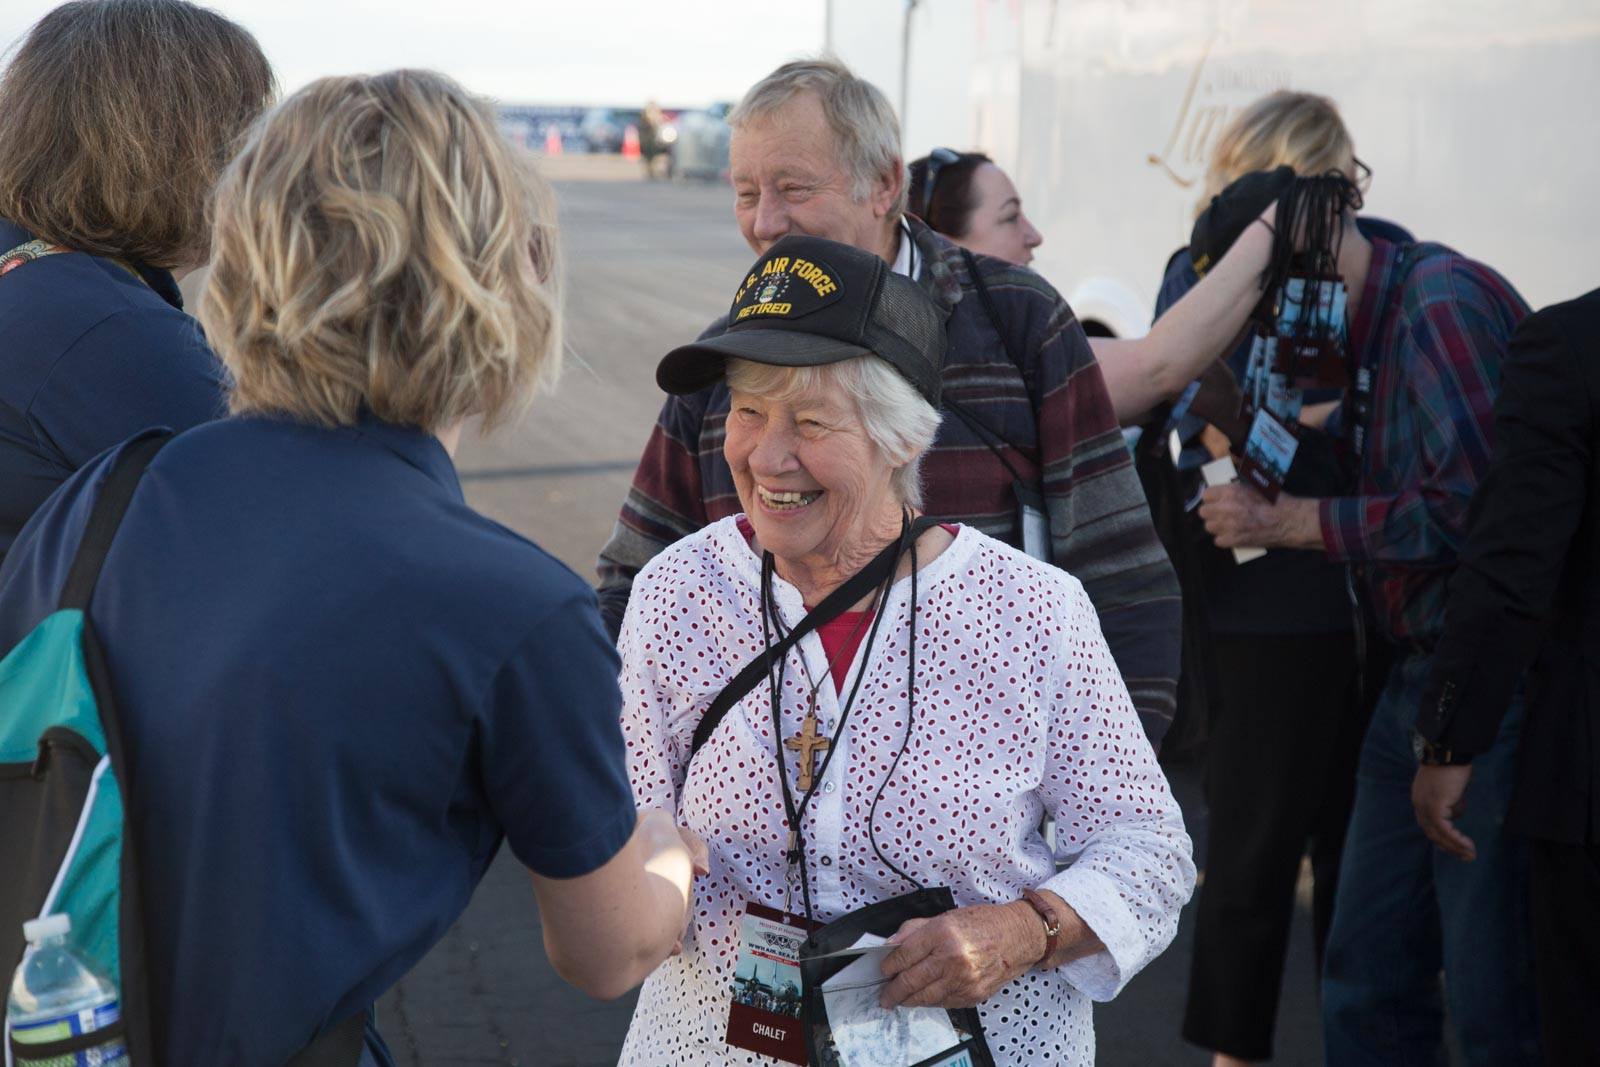 Peoples Health employee greeting attendee at the WWII veterans event at the Lakefront air show